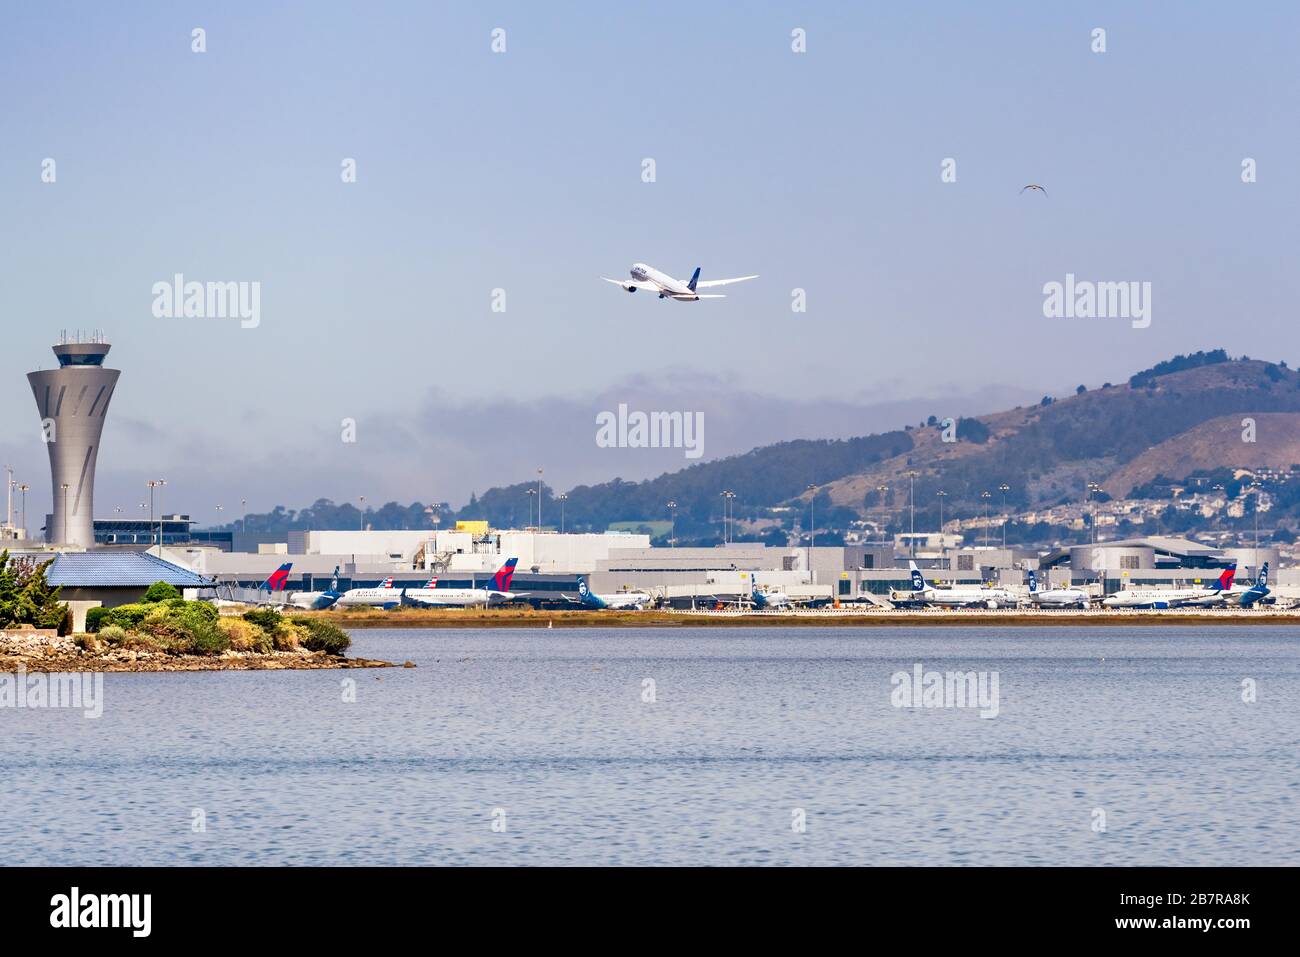 Aug 31, 2019 San Francisco / CA / USA - San Francisco International Airport (SFO) located on the San Francisco Bay shore; Airplanes stationed on the t Stock Photo